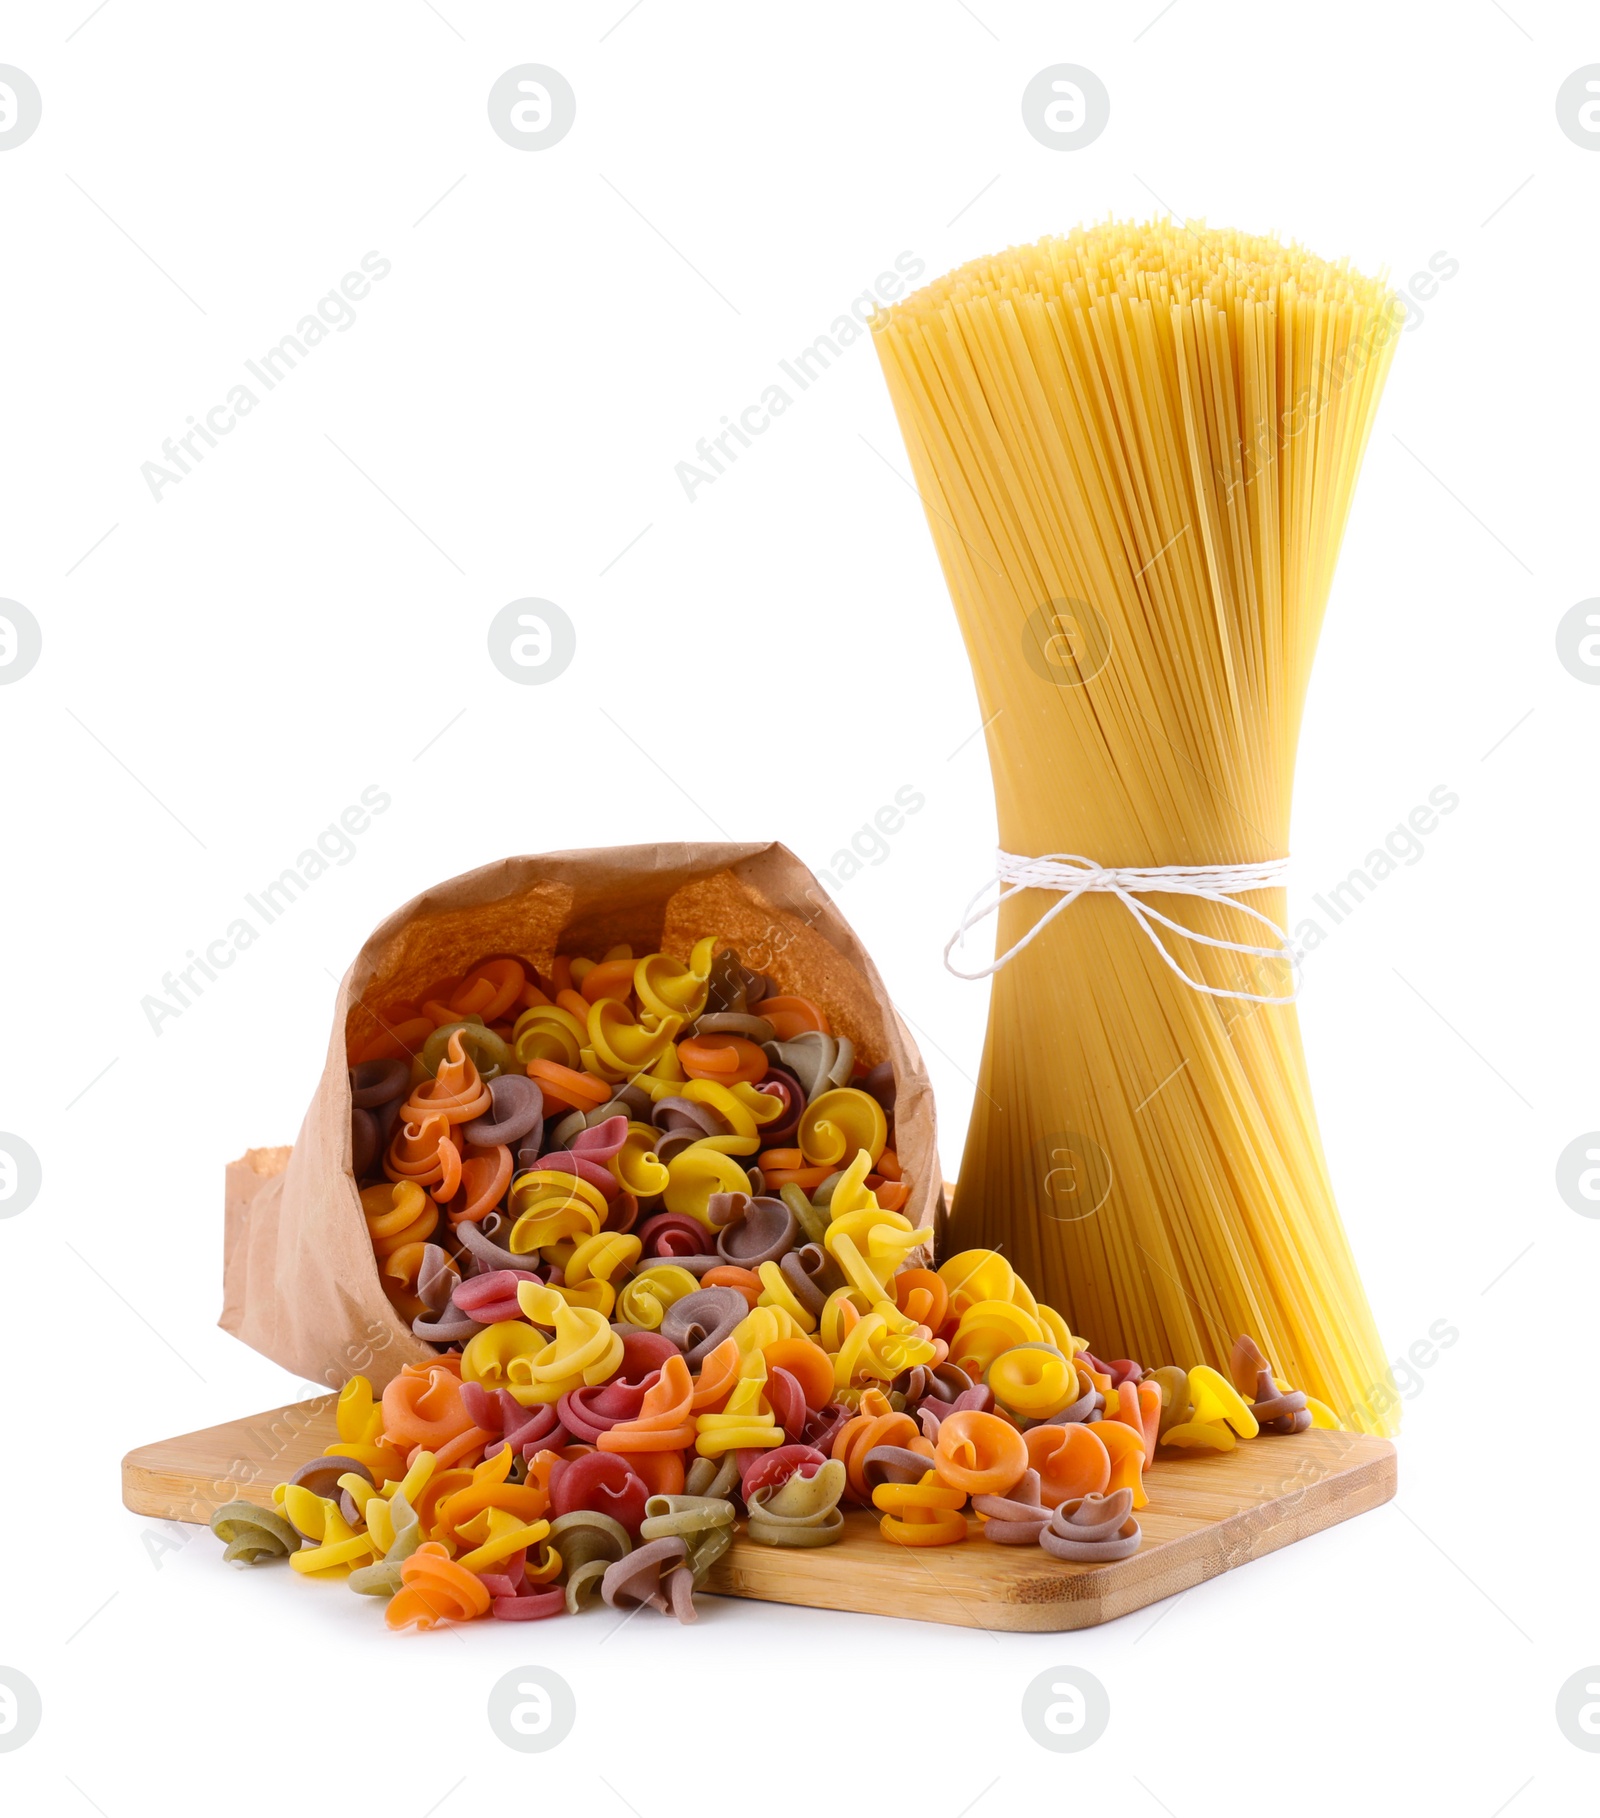 Photo of Wooden board with spaghetti and colorful insalatonde pasta isolated on white